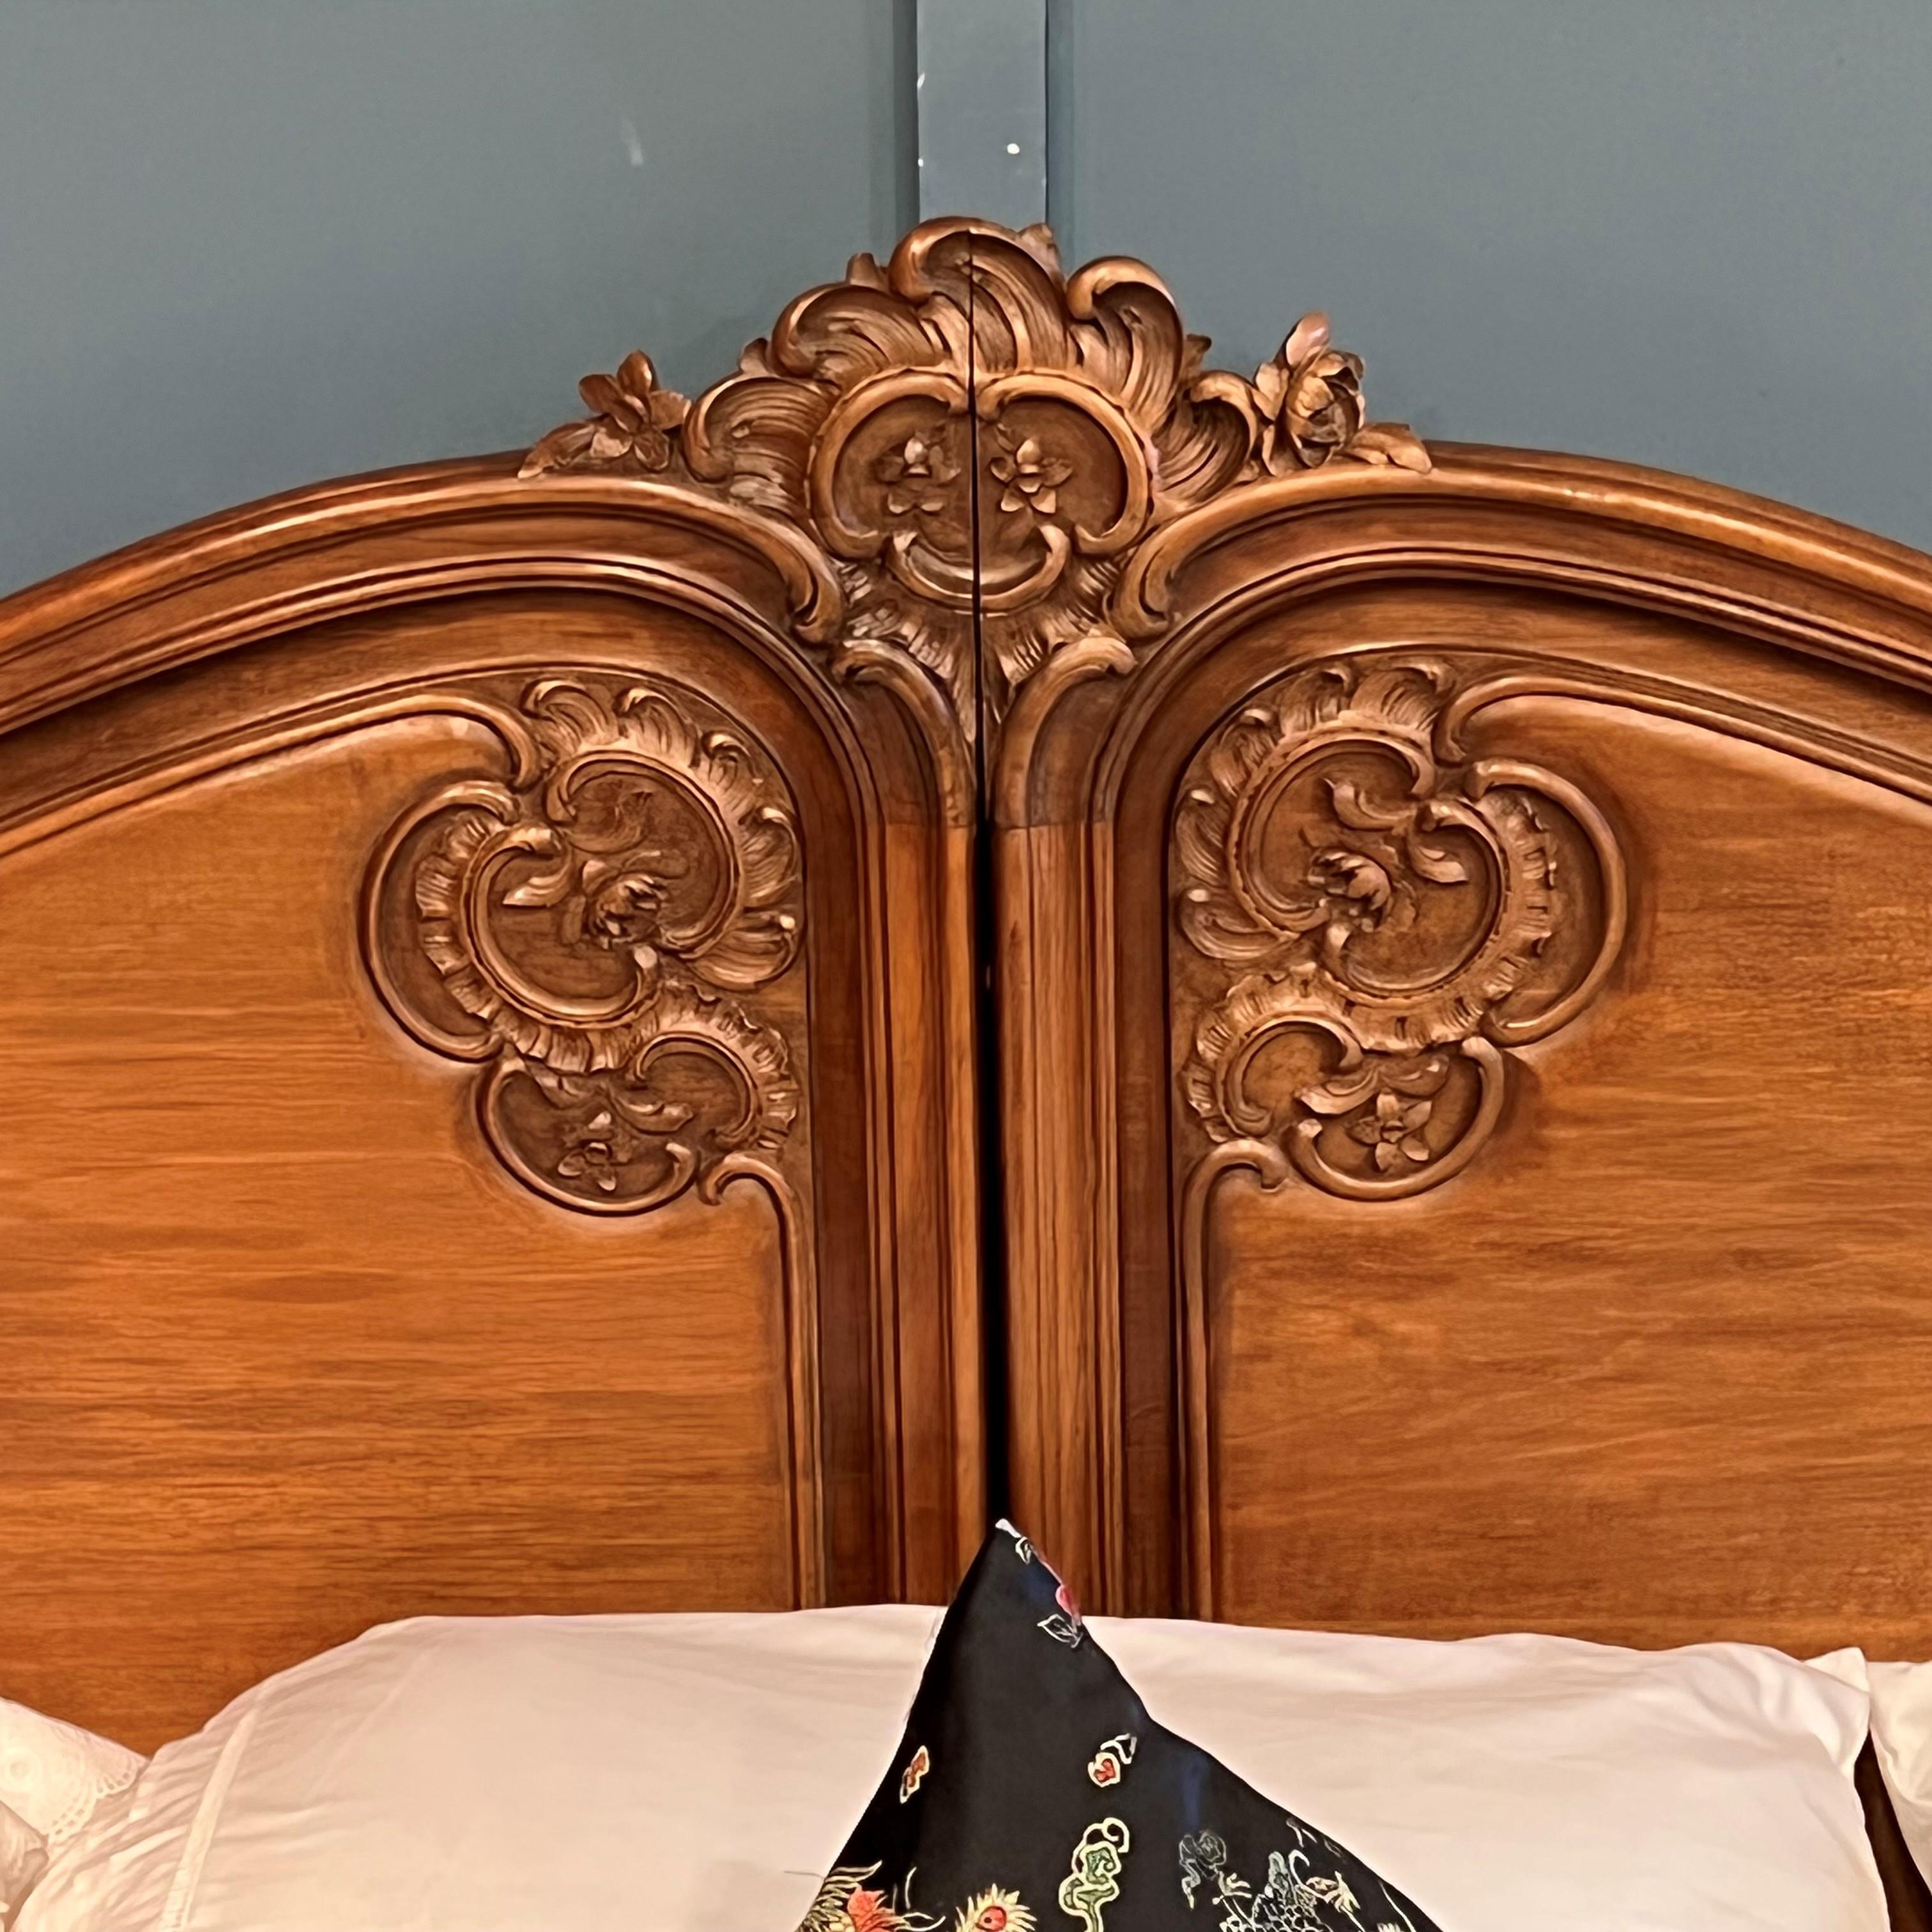 French Provincial Super Superking, Antique French Walnut Bed